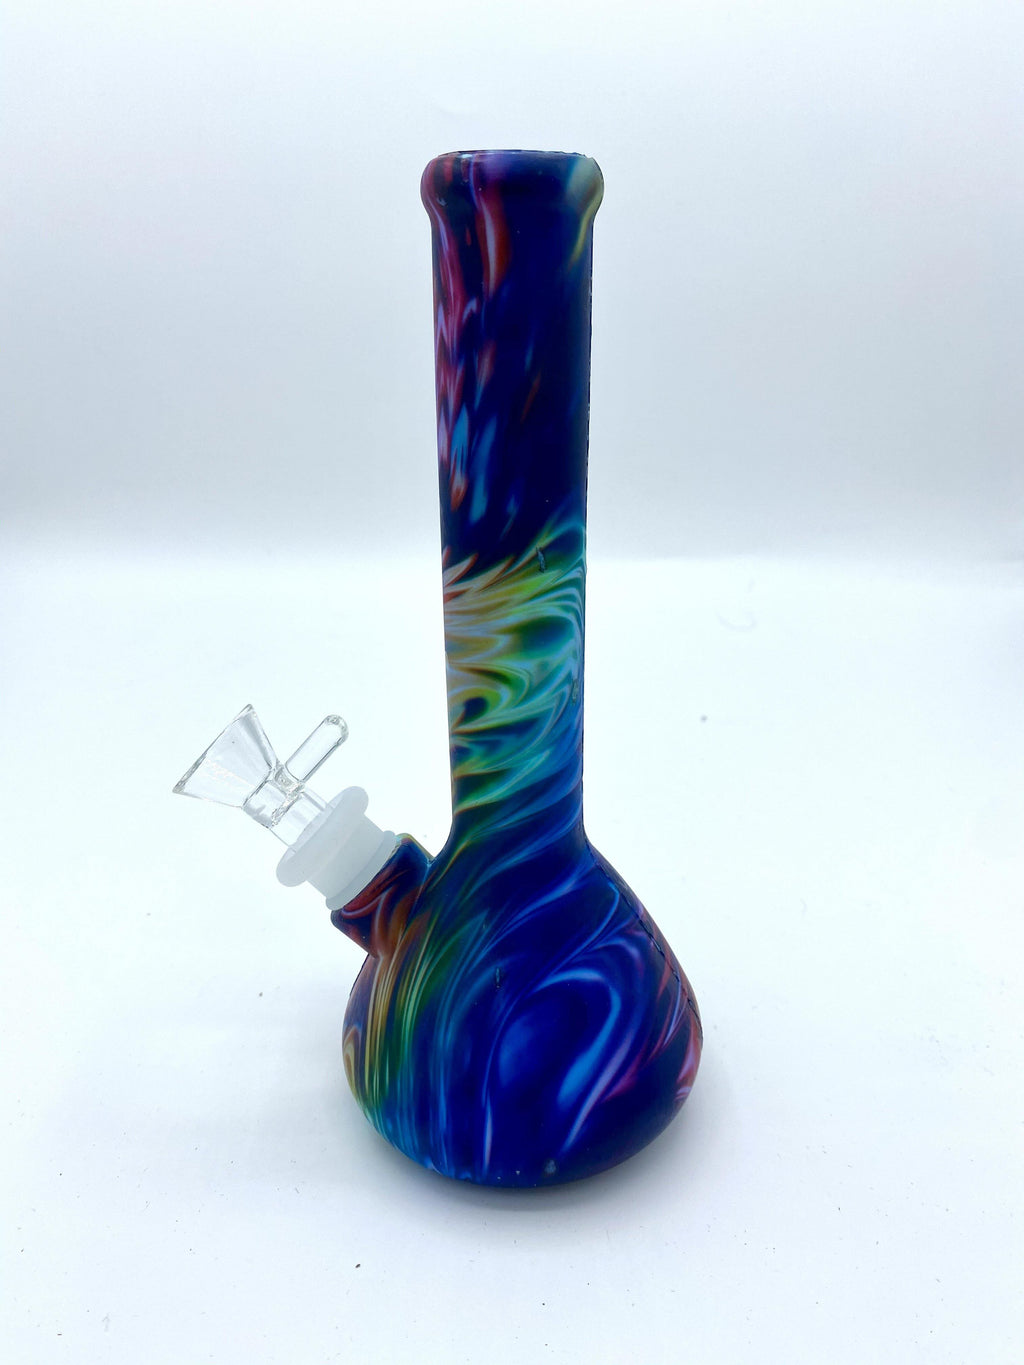 8" Unbreakable Silicone Bong with 14mm Glass Bowl and down stem - Bongsus